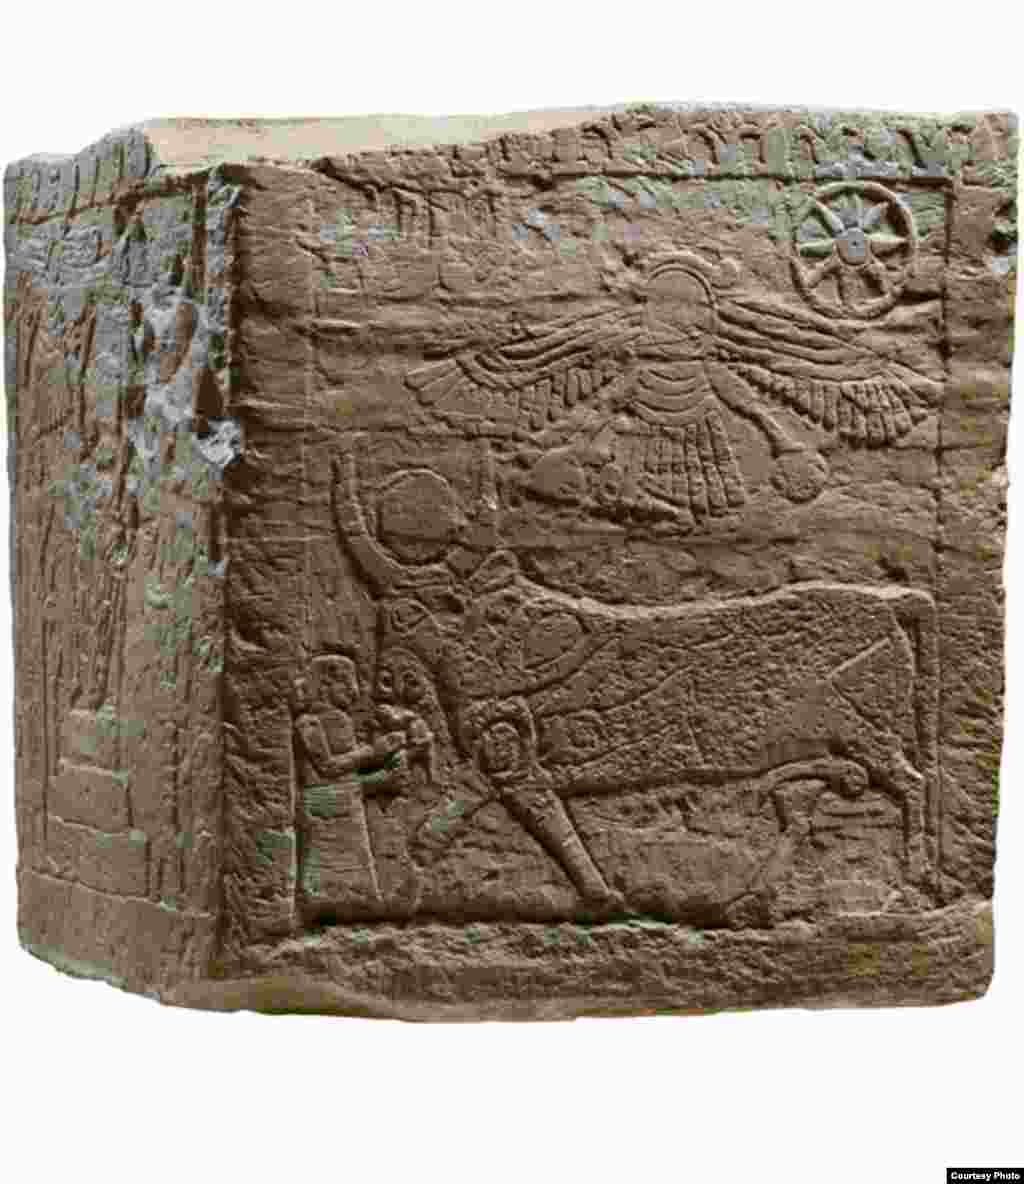 The so-called al-Hamra cube was discovered in the al-Hamra Temple at Tayma, an important trading city in northwestern Arabia. Its fine decoration confirms the integration of Egyptian and Mesopotamian motifs into local religious practices. (Freer Sackler G